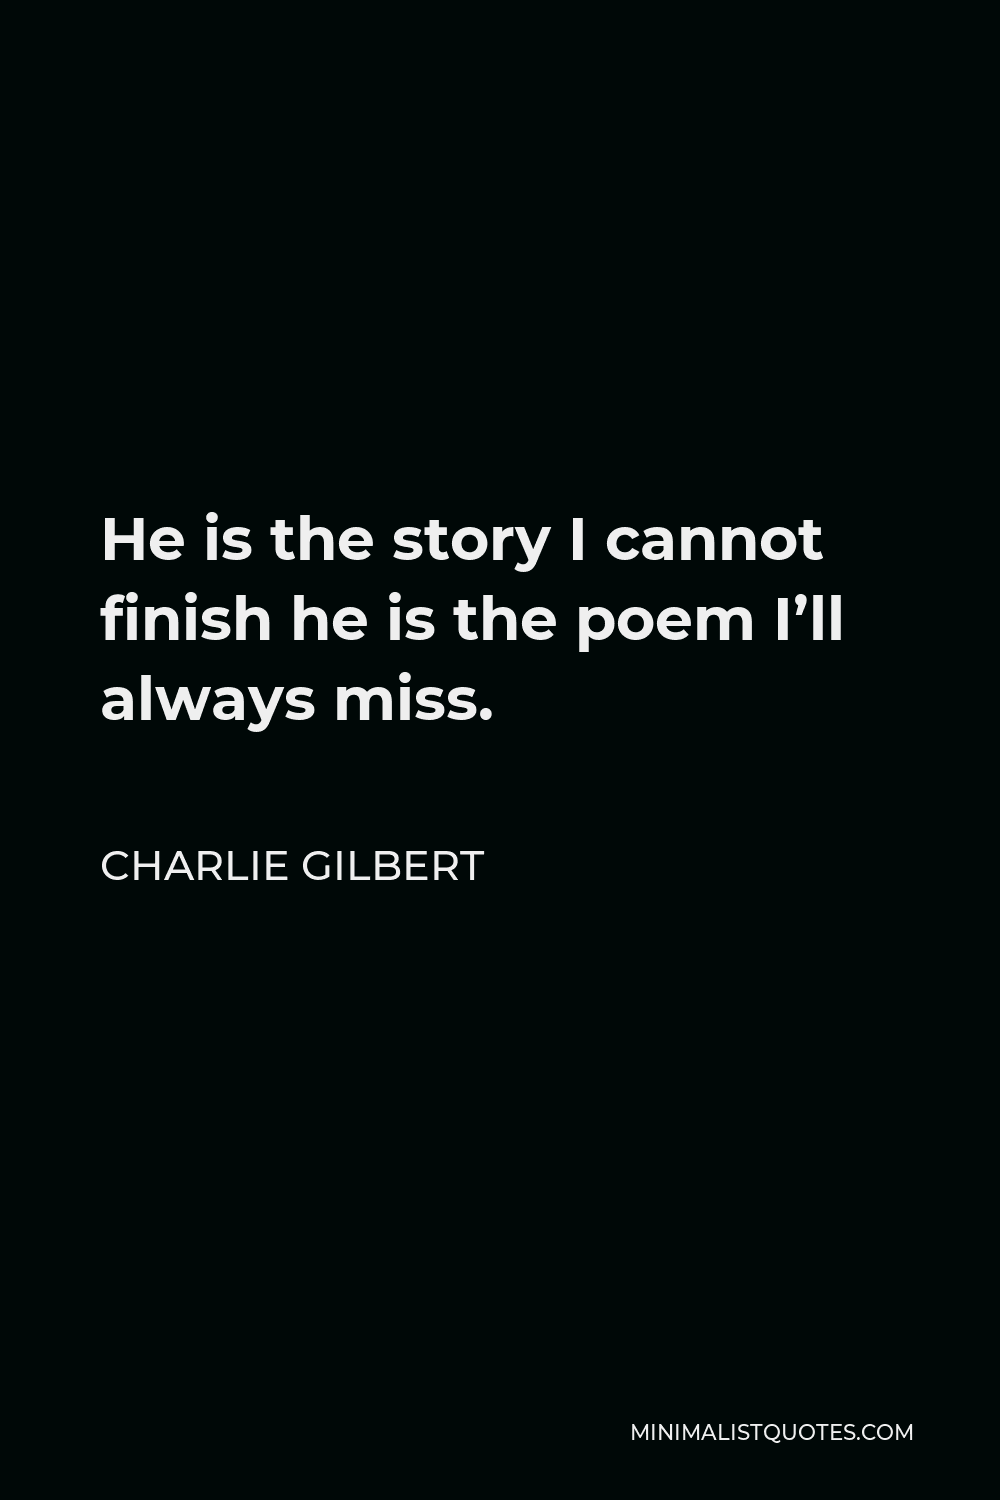 Charlie Gilbert Quote - He is the story I cannot finish he is the poem I’ll always miss.